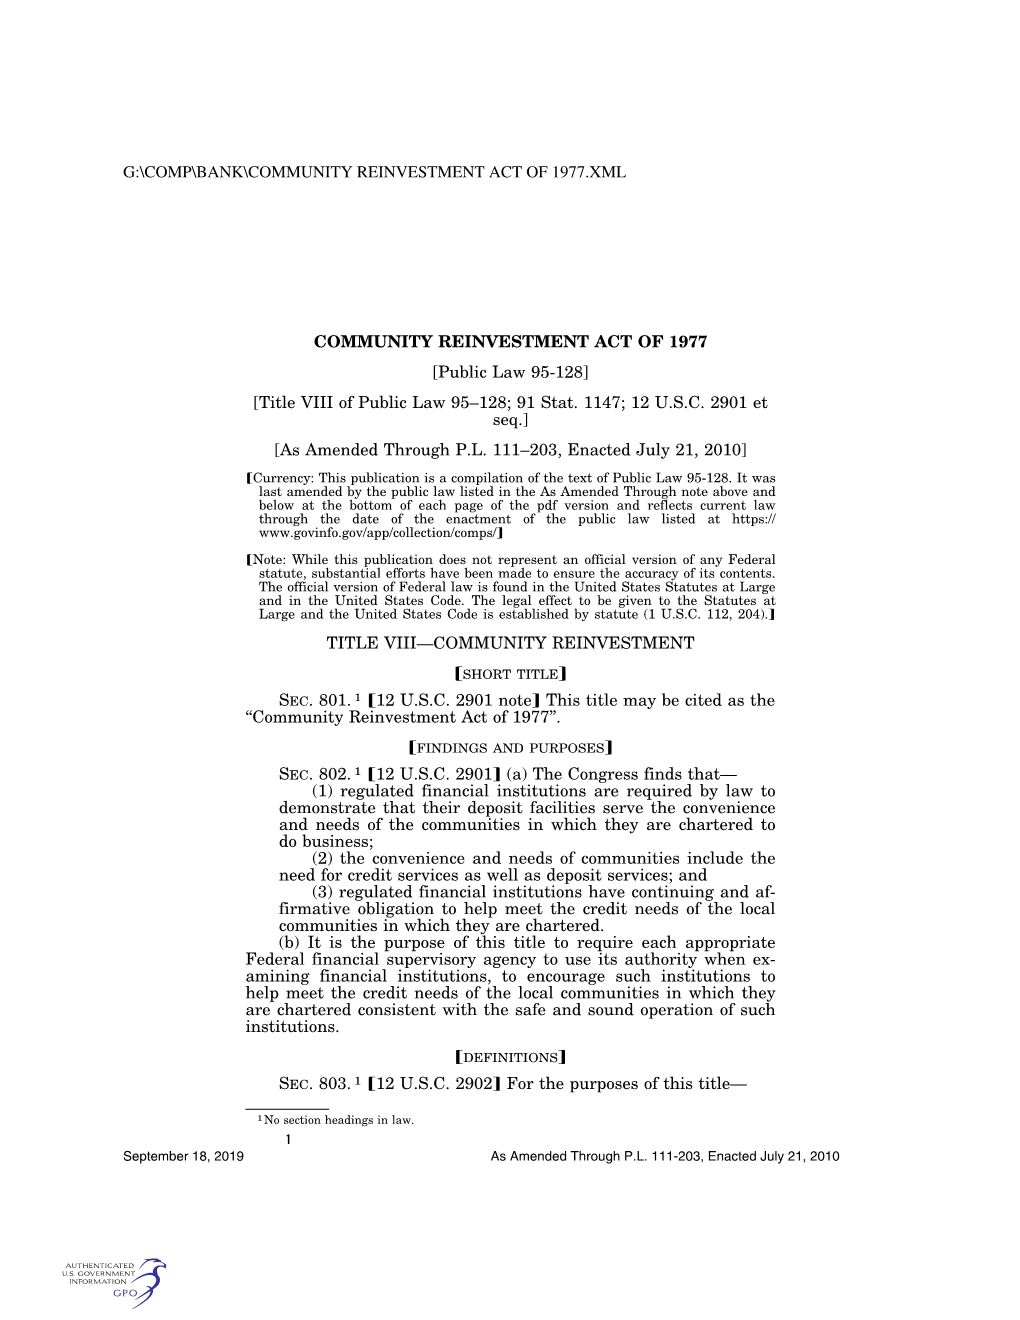 COMMUNITY REINVESTMENT ACT of 1977 [Public Law 95-128] [Title VIII of Public Law 95–128; 91 Stat